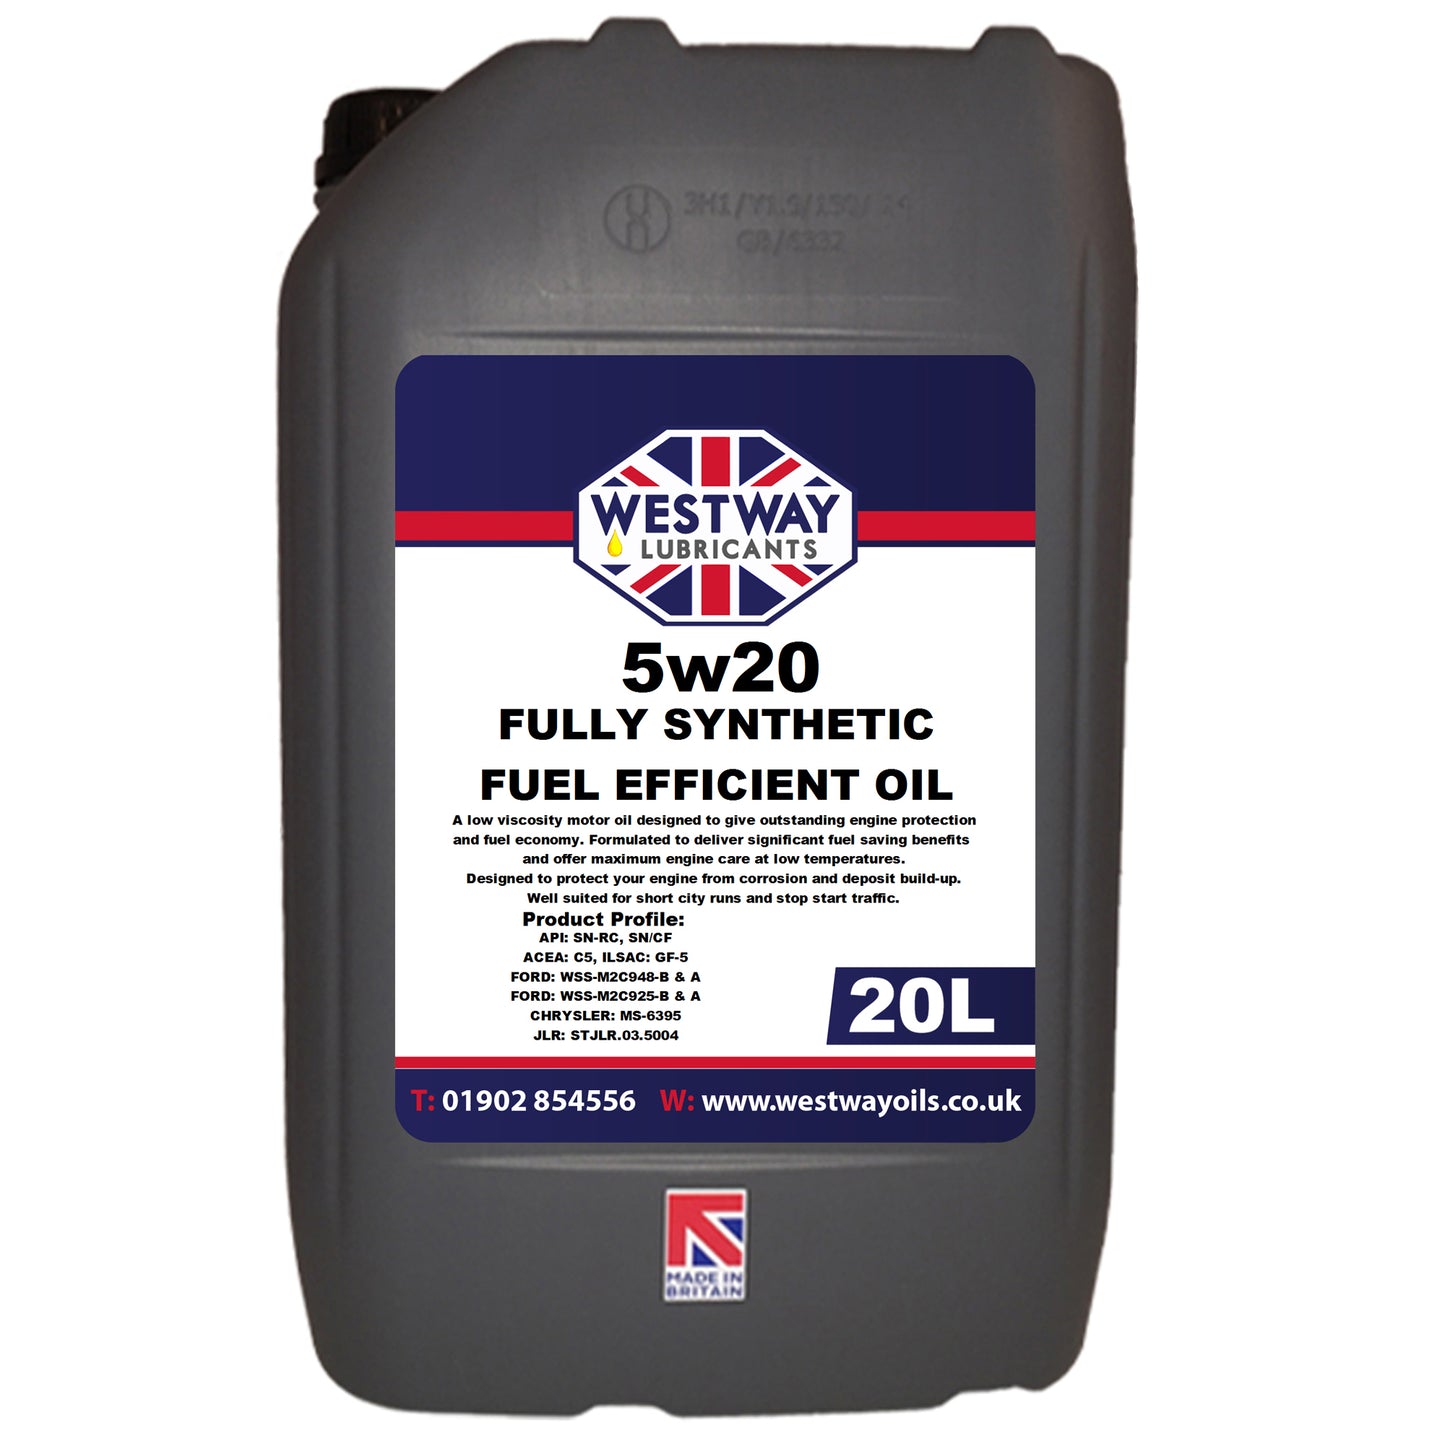 5W20 EcoBoost Synthetic Engine Oil Meets Ford WSS-M2C948-B Specification